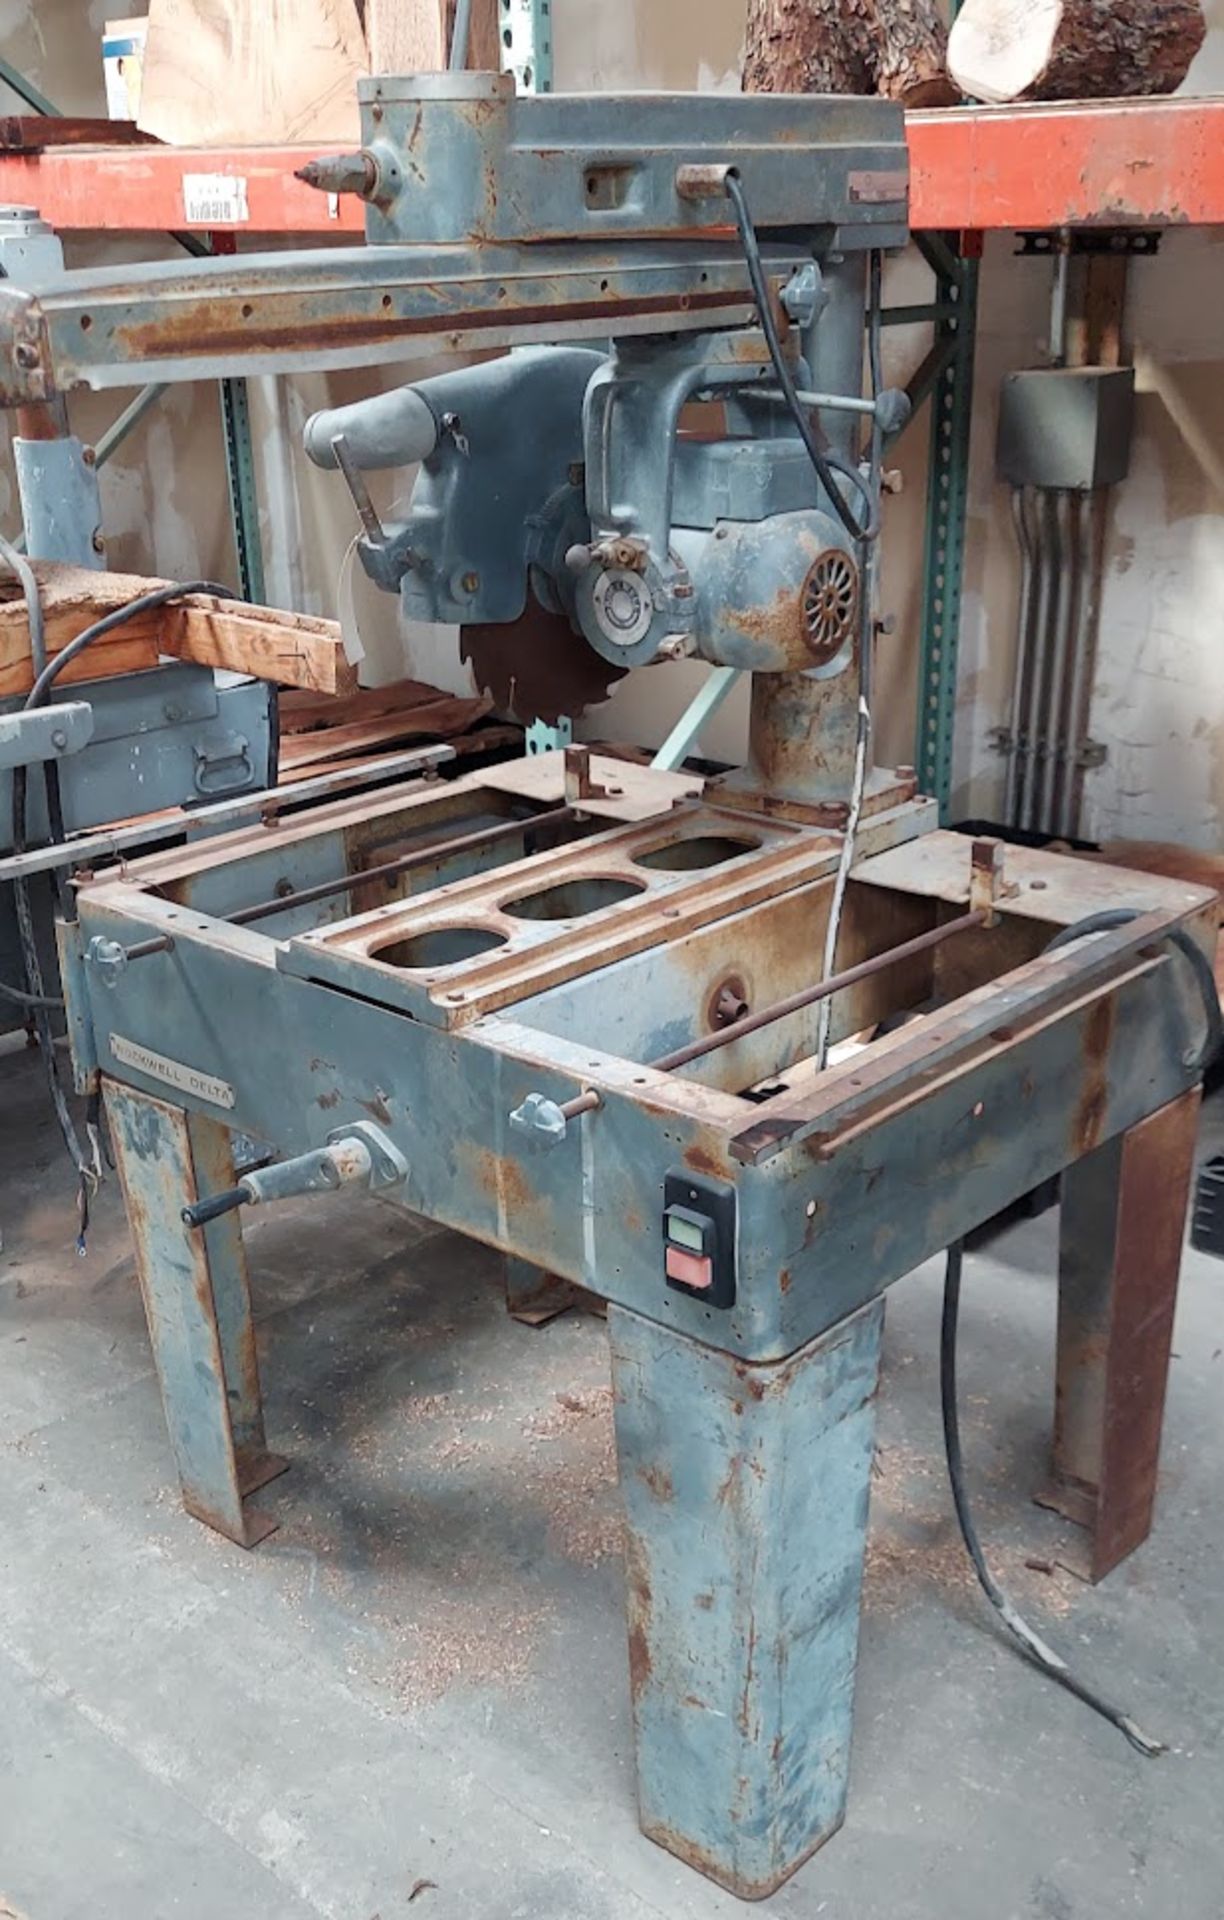 Delta / Rockwell 16" Radial Arm Saw, Model #16-RAS, 5 Hp 230/460 volt 3ph Motor, Made in 1972 - Image 2 of 2